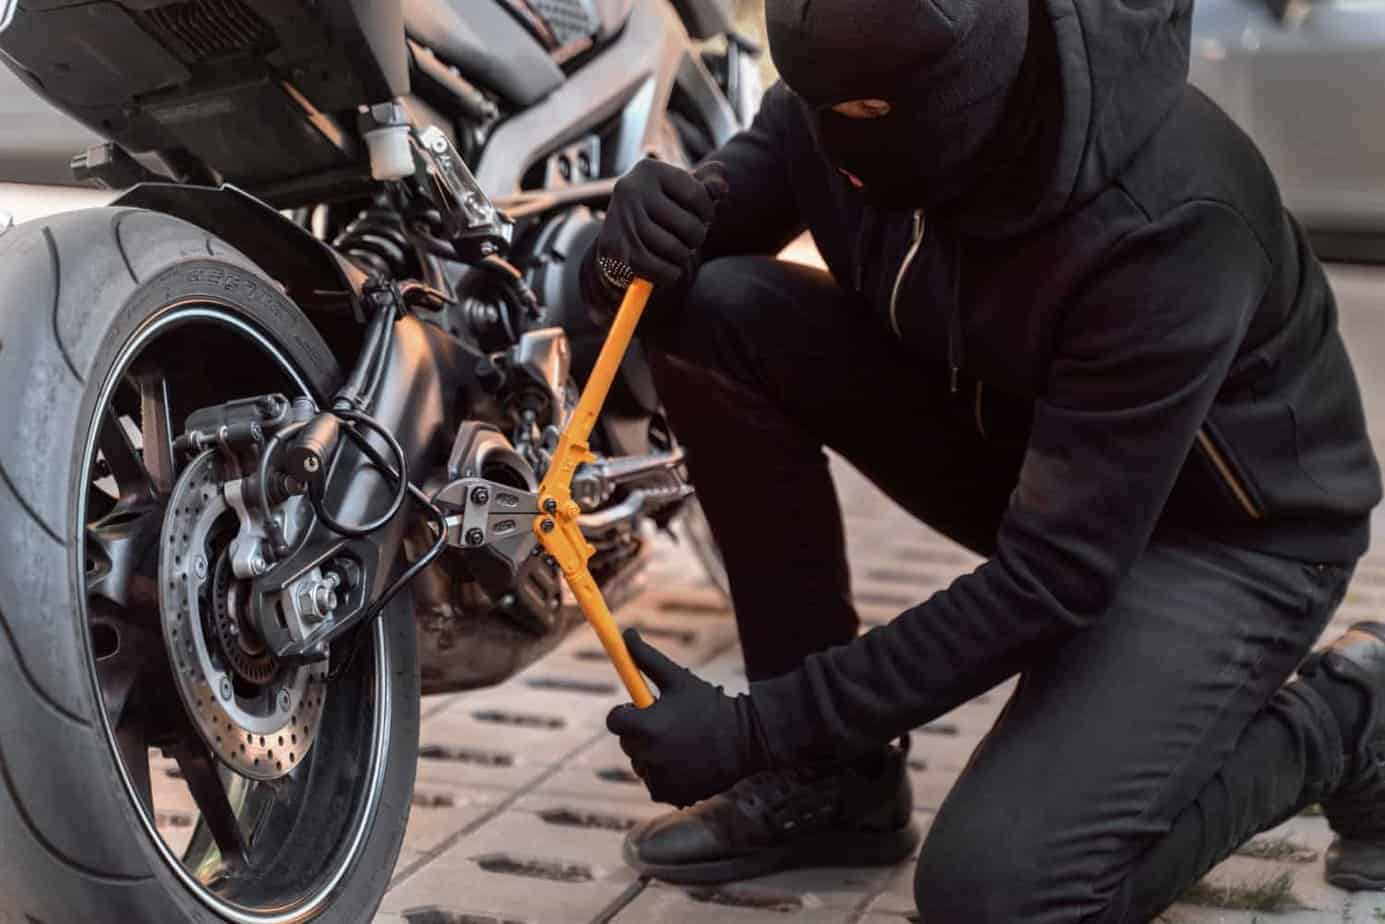 Motorcycle Theft Rings